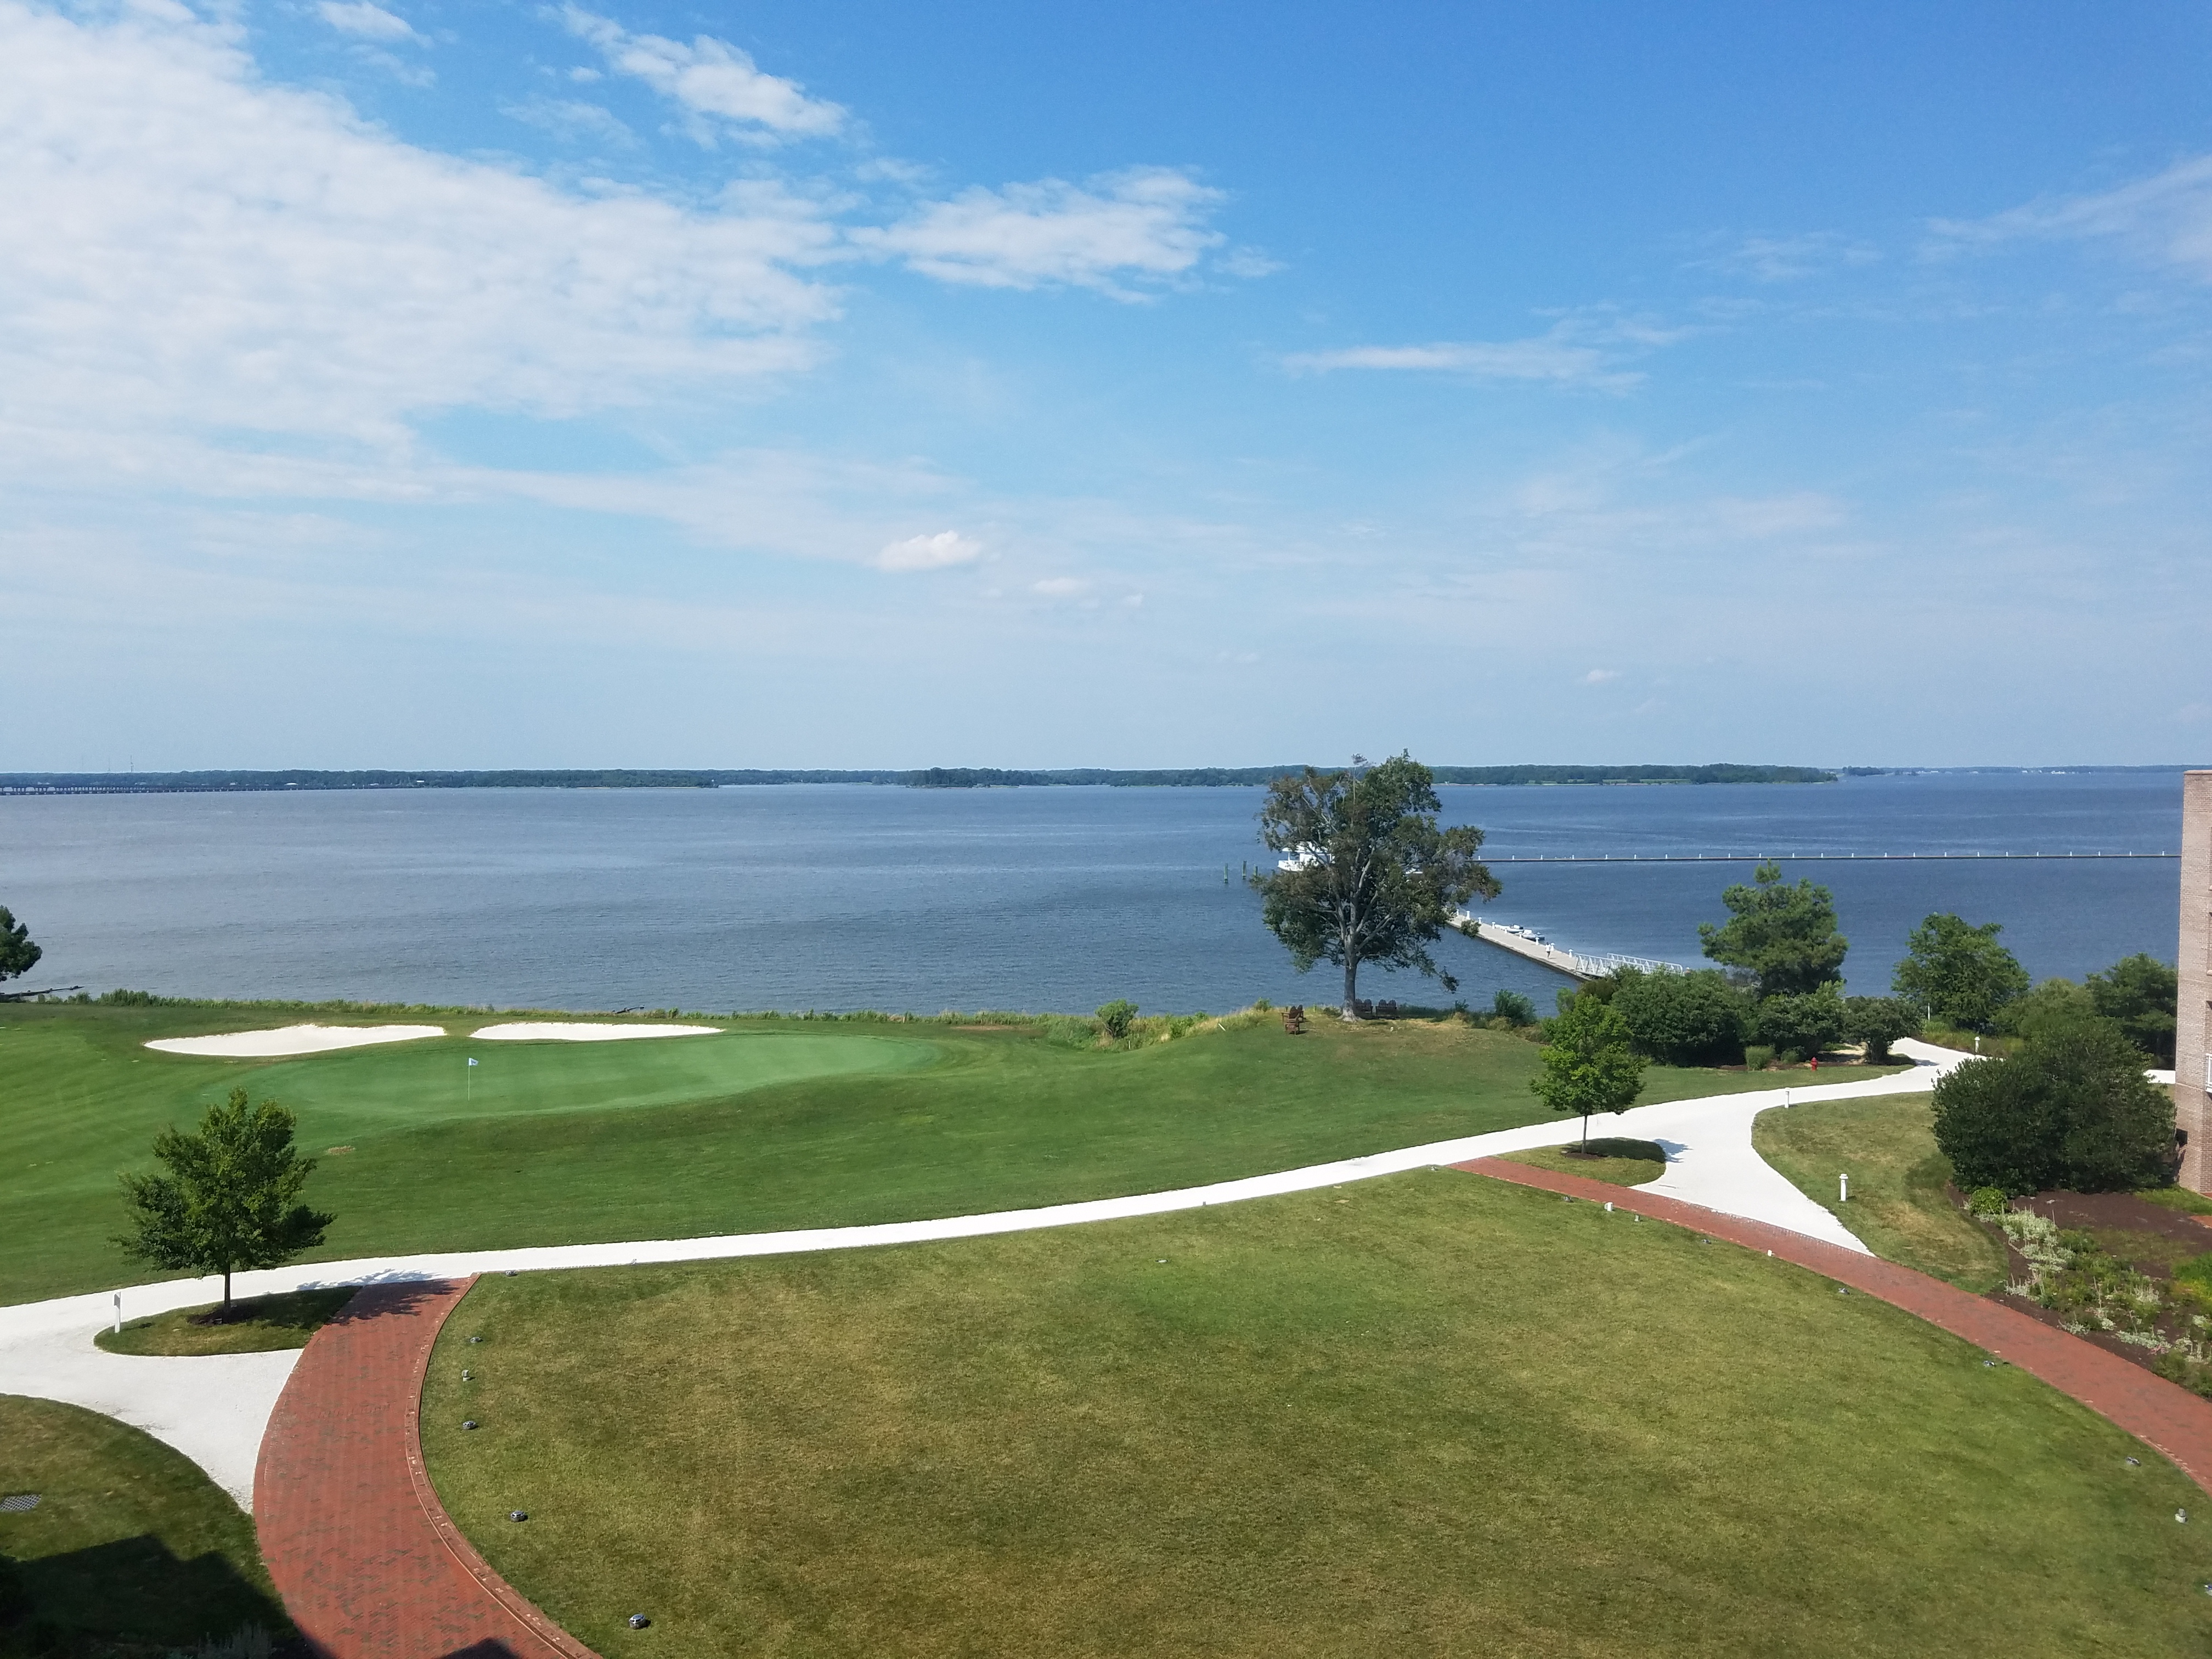 Looking for a beautiful hotel to stay at while visiting Maryland's Eastern Shores? Hyatt Regency Chesapeake Bay has plenty to offer.